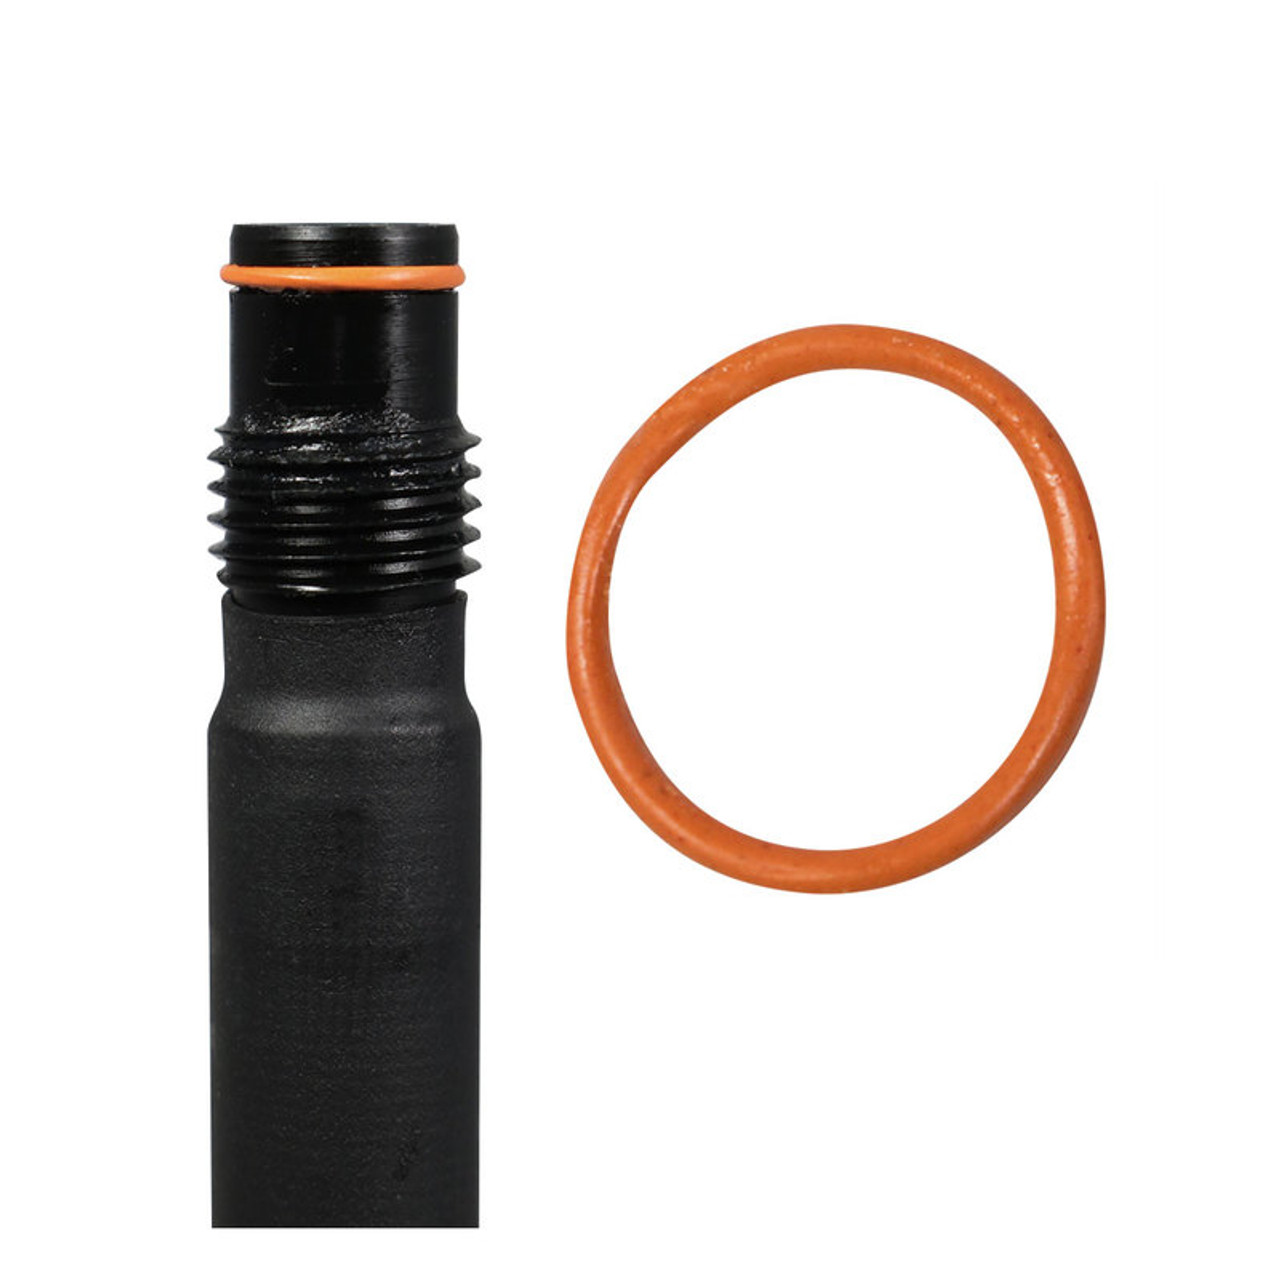 Orange O-Ring for Scaler Handpiece (10 pieces)